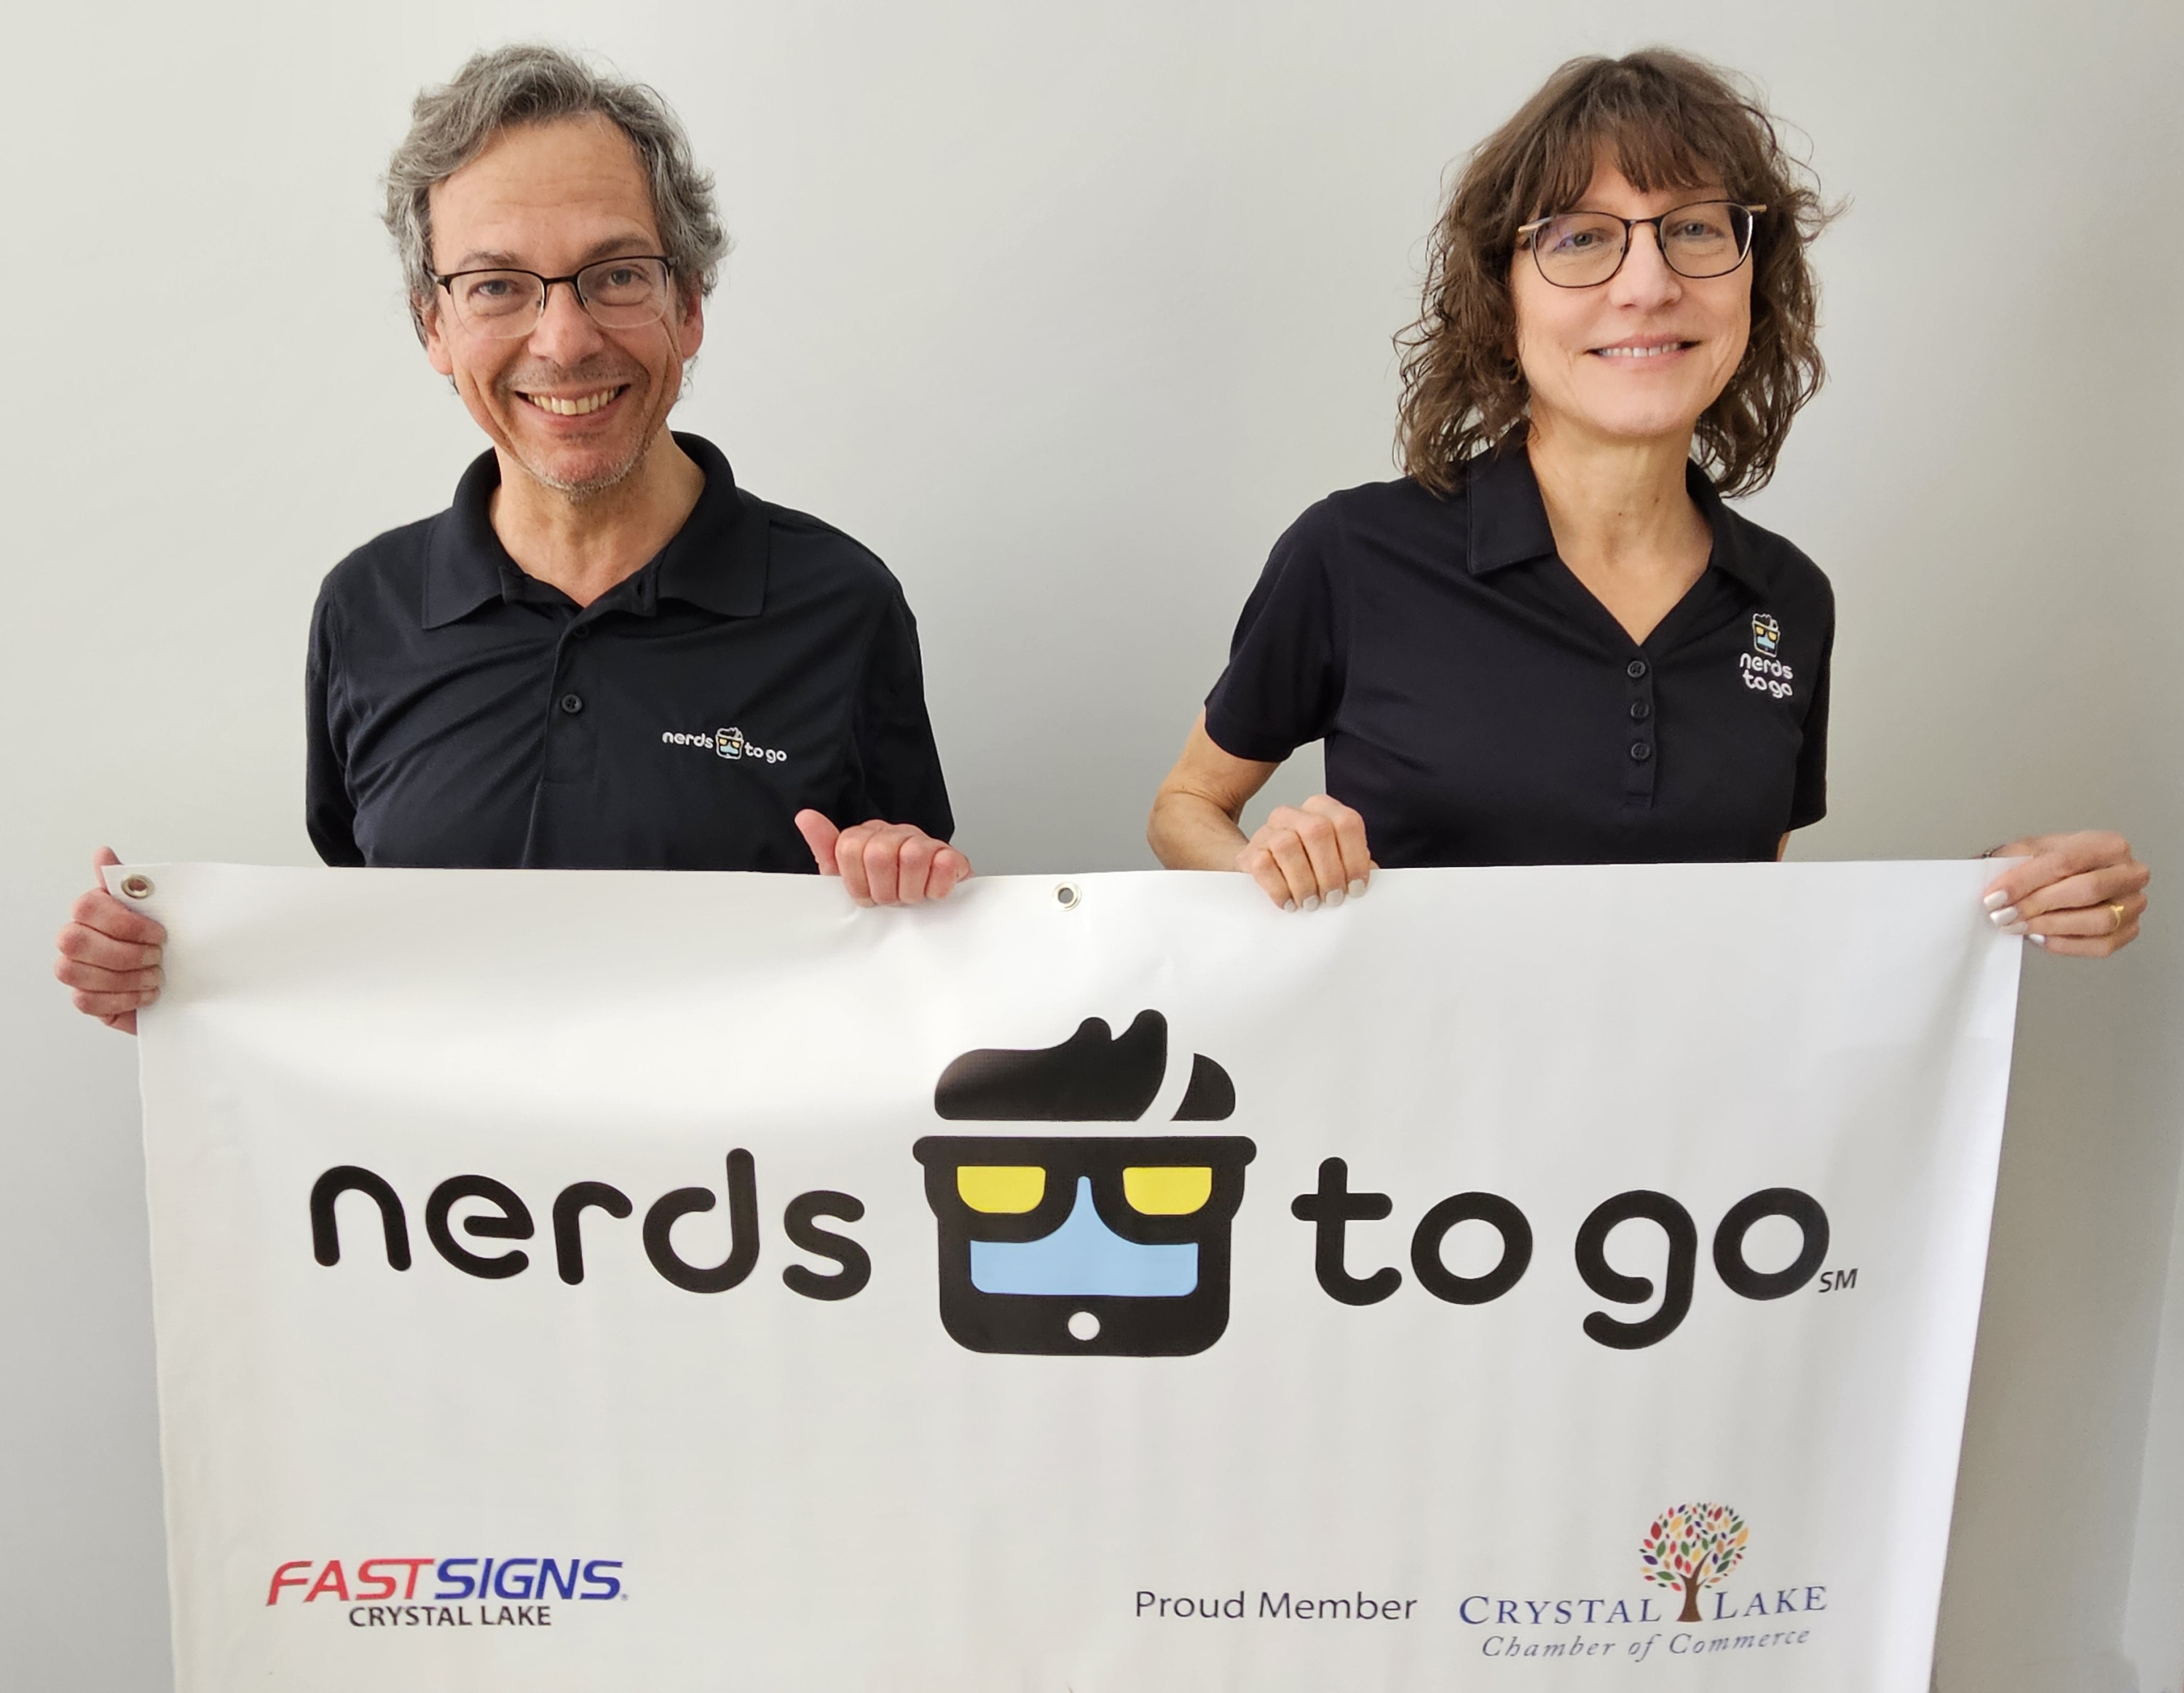 A man and a woman wearing glasses hold a Nerds to Go banner